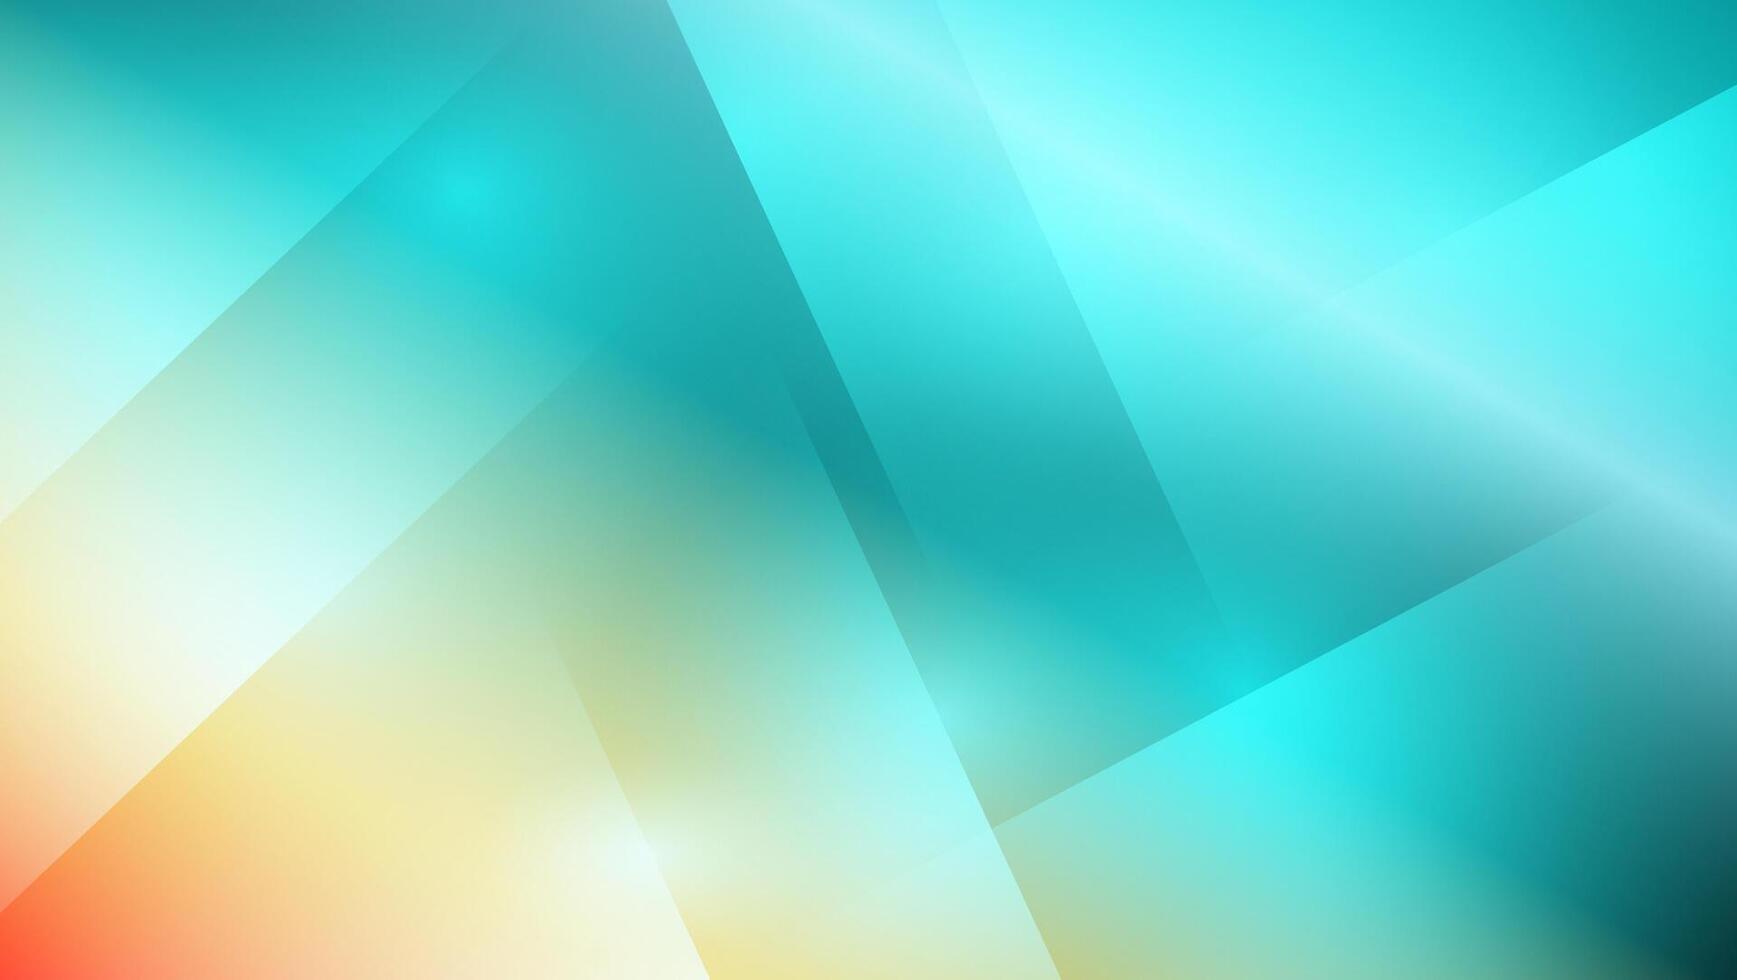 Abstract modern minimalist geometric background with gradation colors vector